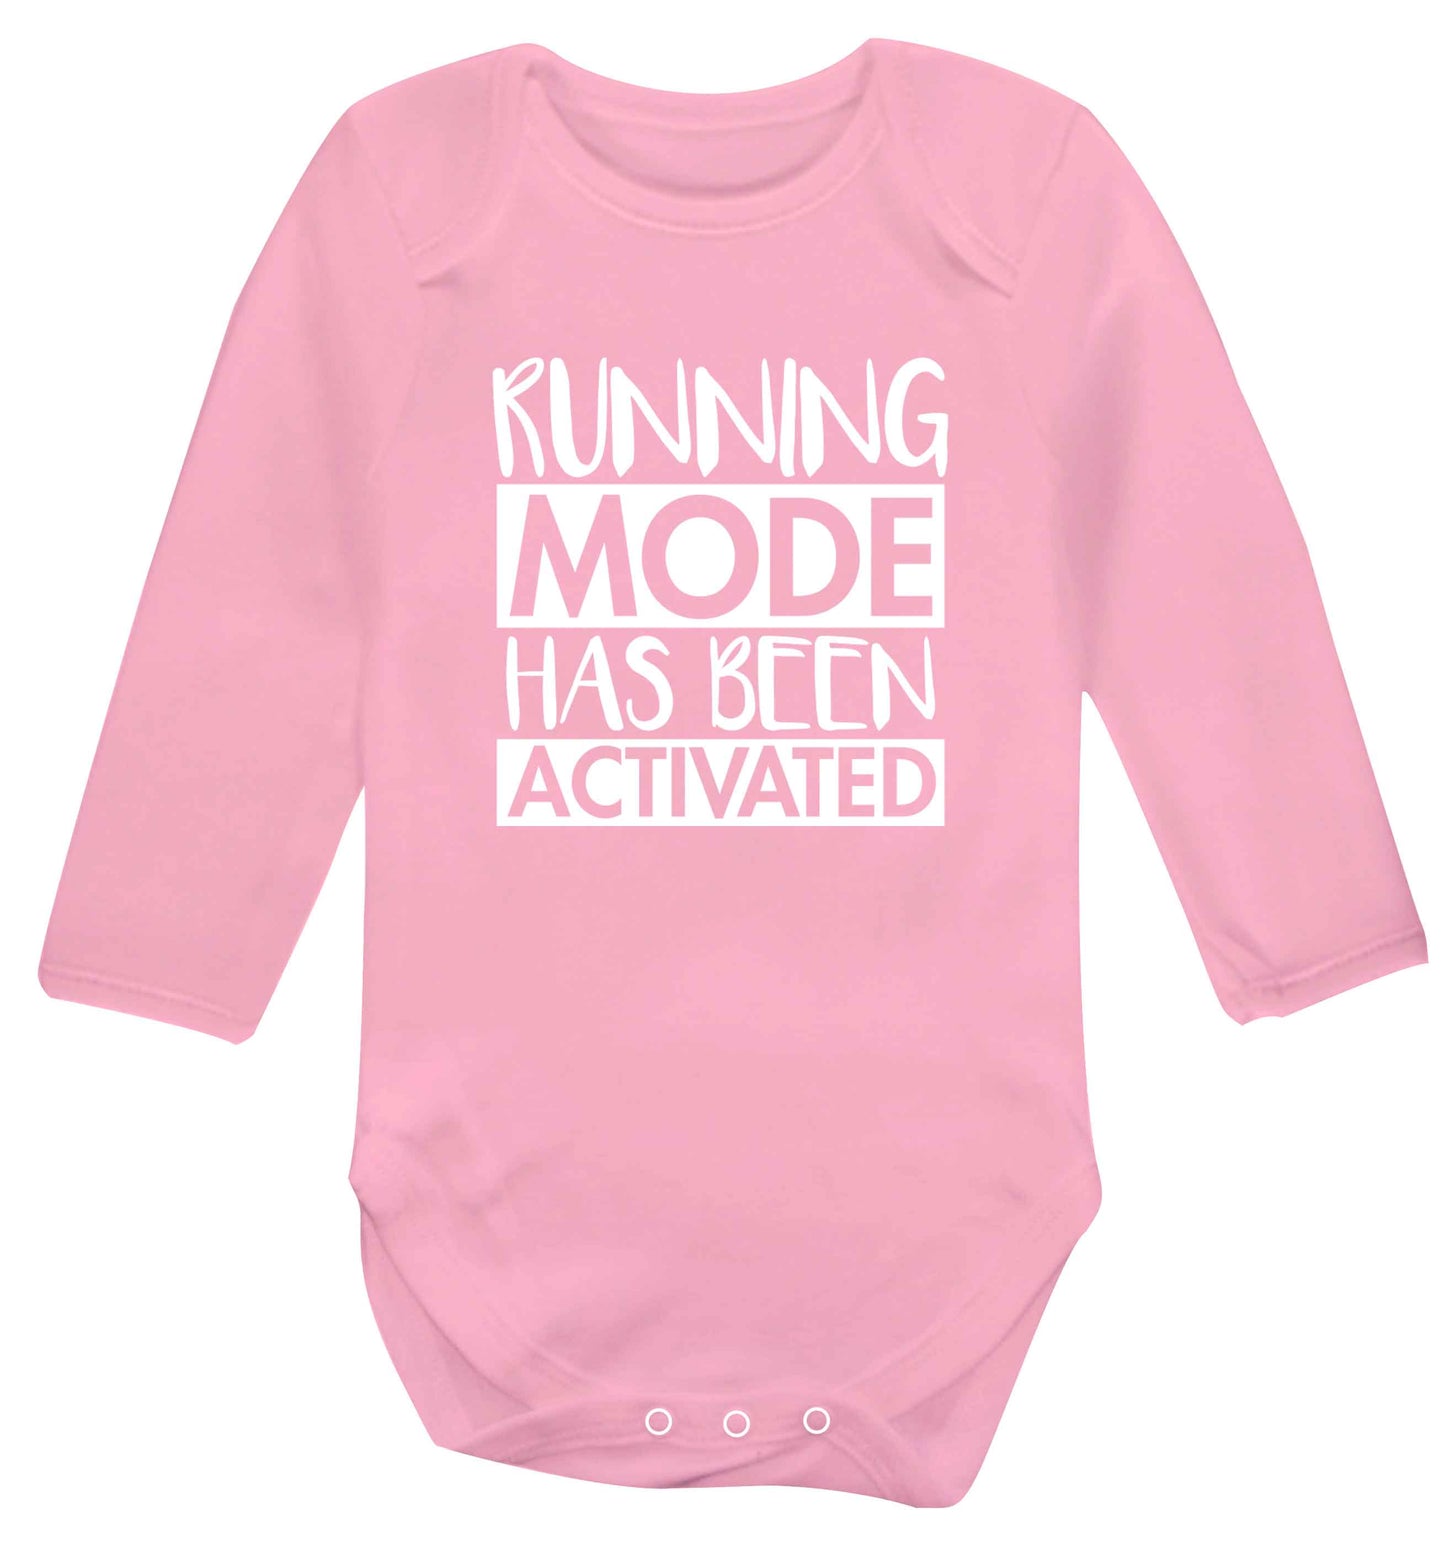 Running mode has been activated baby vest long sleeved pale pink 6-12 months